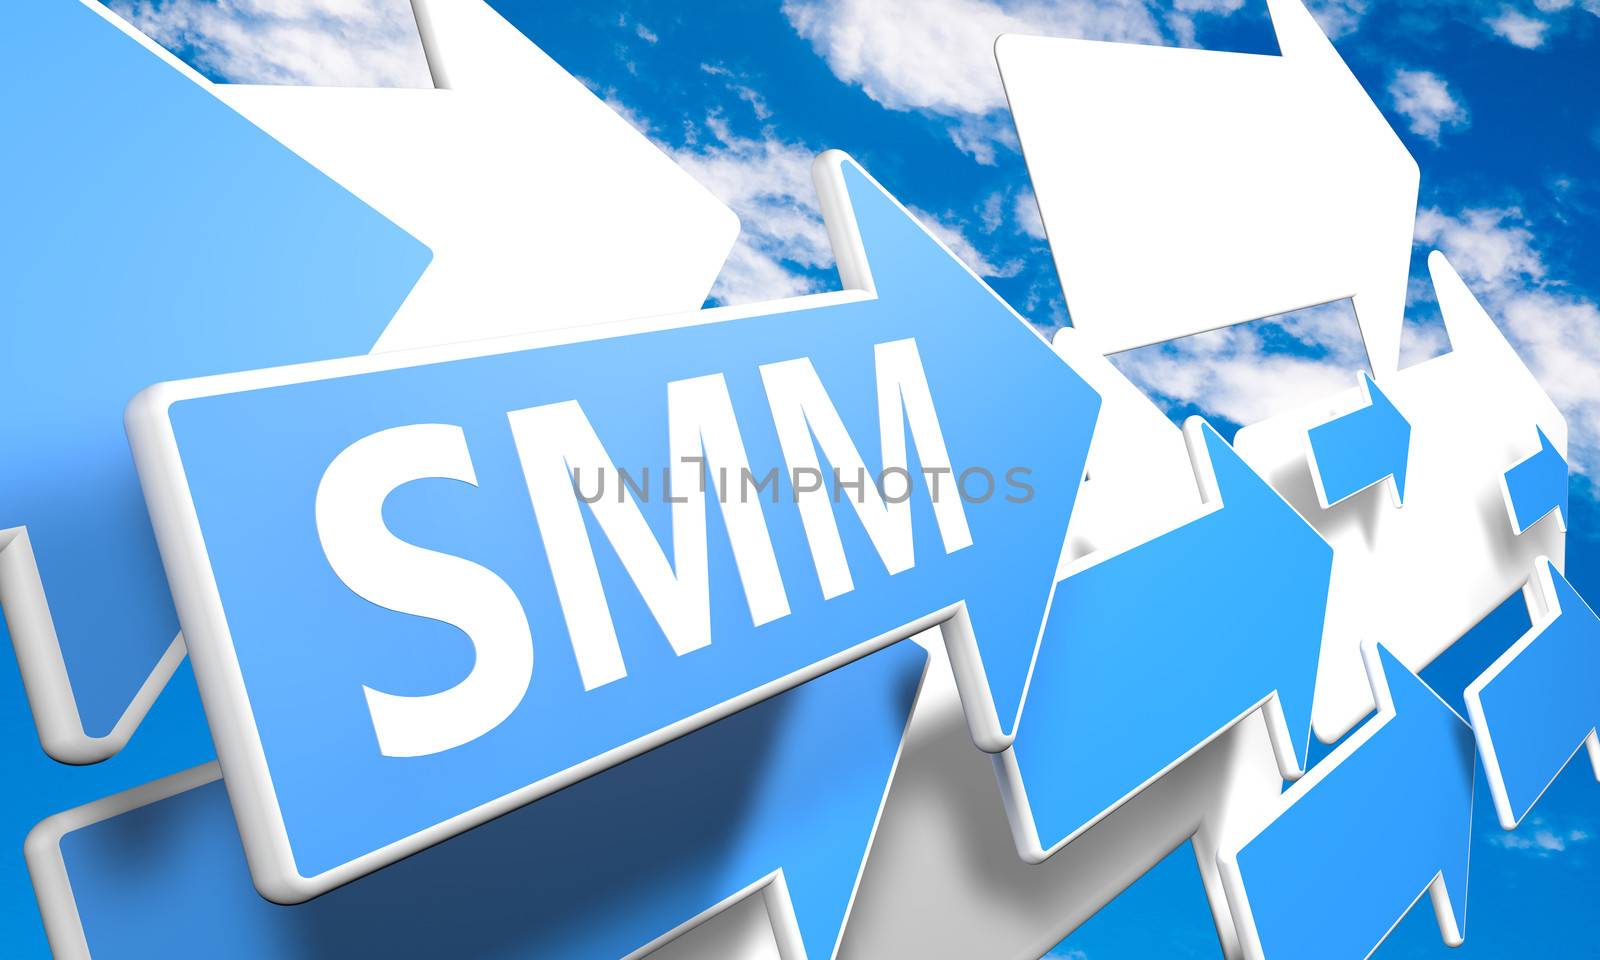 Social Media Marketing 3d render concept with blue and white arrows flying upwards in a blue sky with clouds